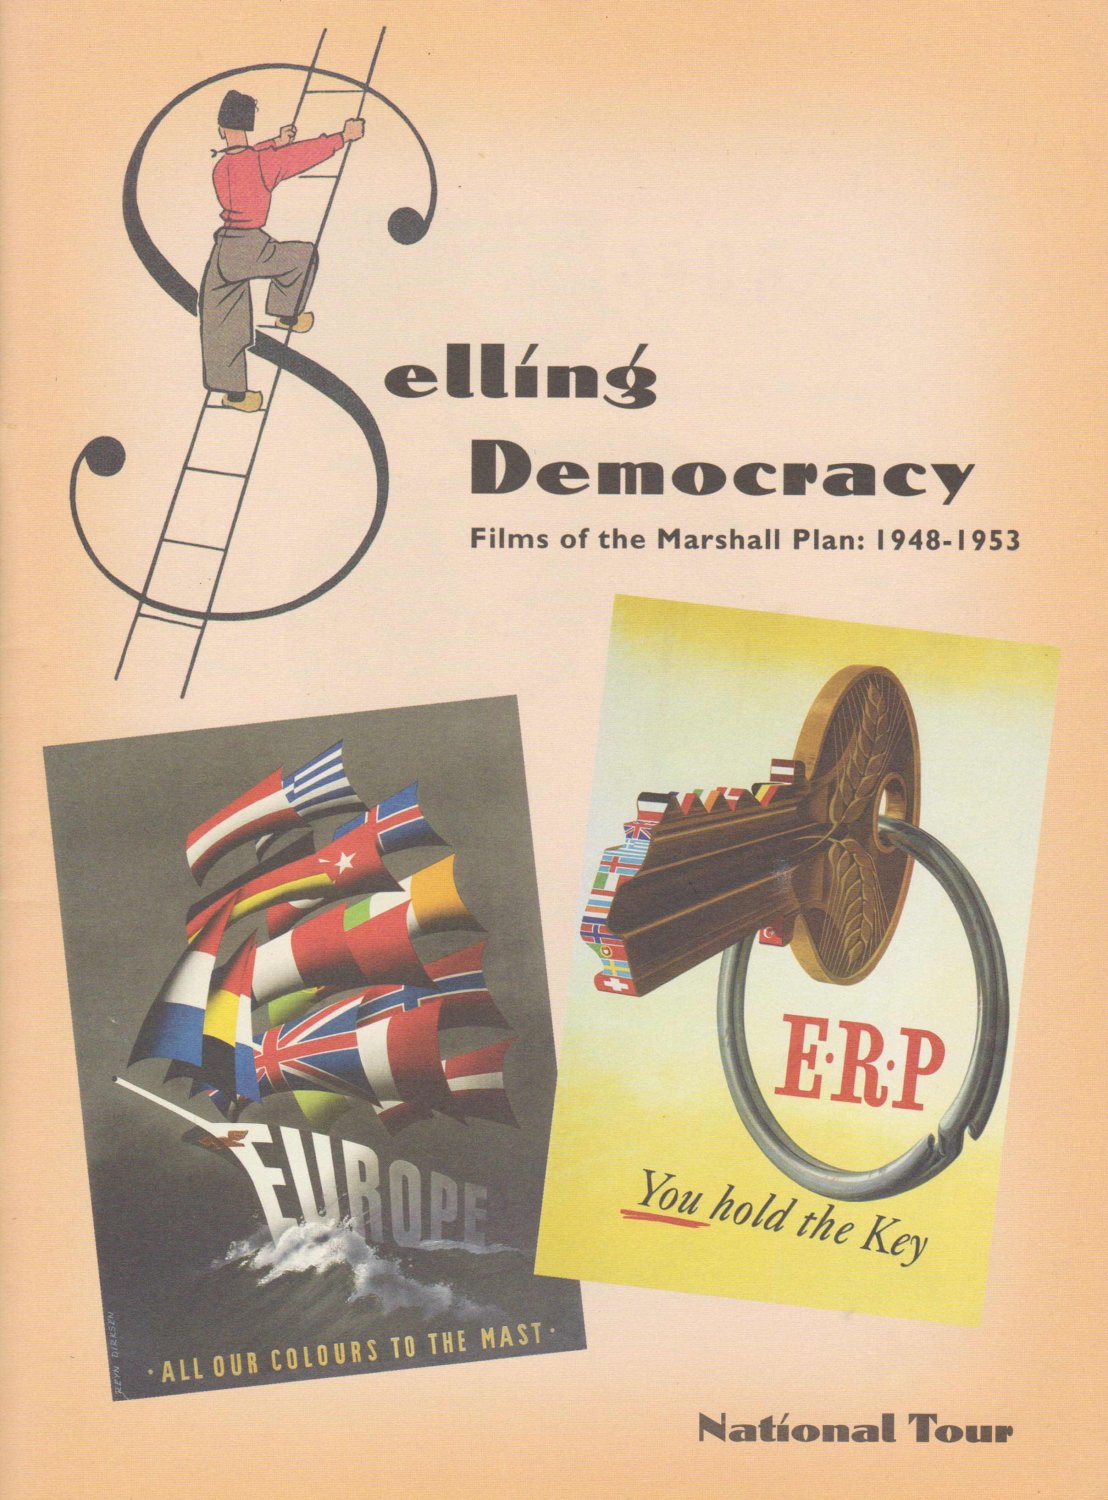 SCHULBERG, Sandra / Carter, Ed (Curators):  Selling Democracy. Films of the Marshall Plan: 1948-1953. National Tour 2005-2006. 